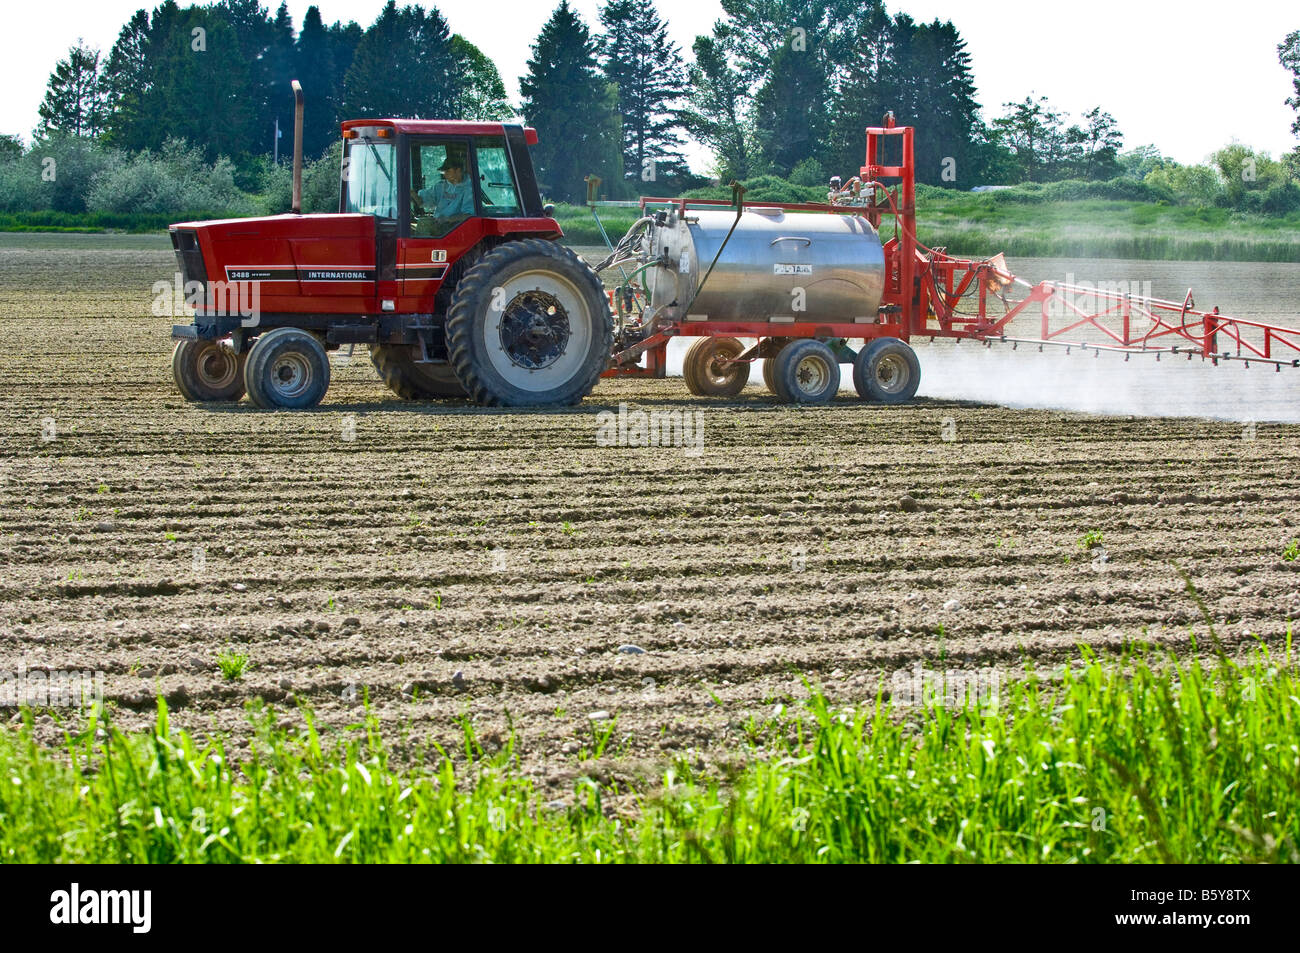 A tractor pulling a spray rig sprays a freshly planted potato field to control weeds in Northwest Washington Stock Photo